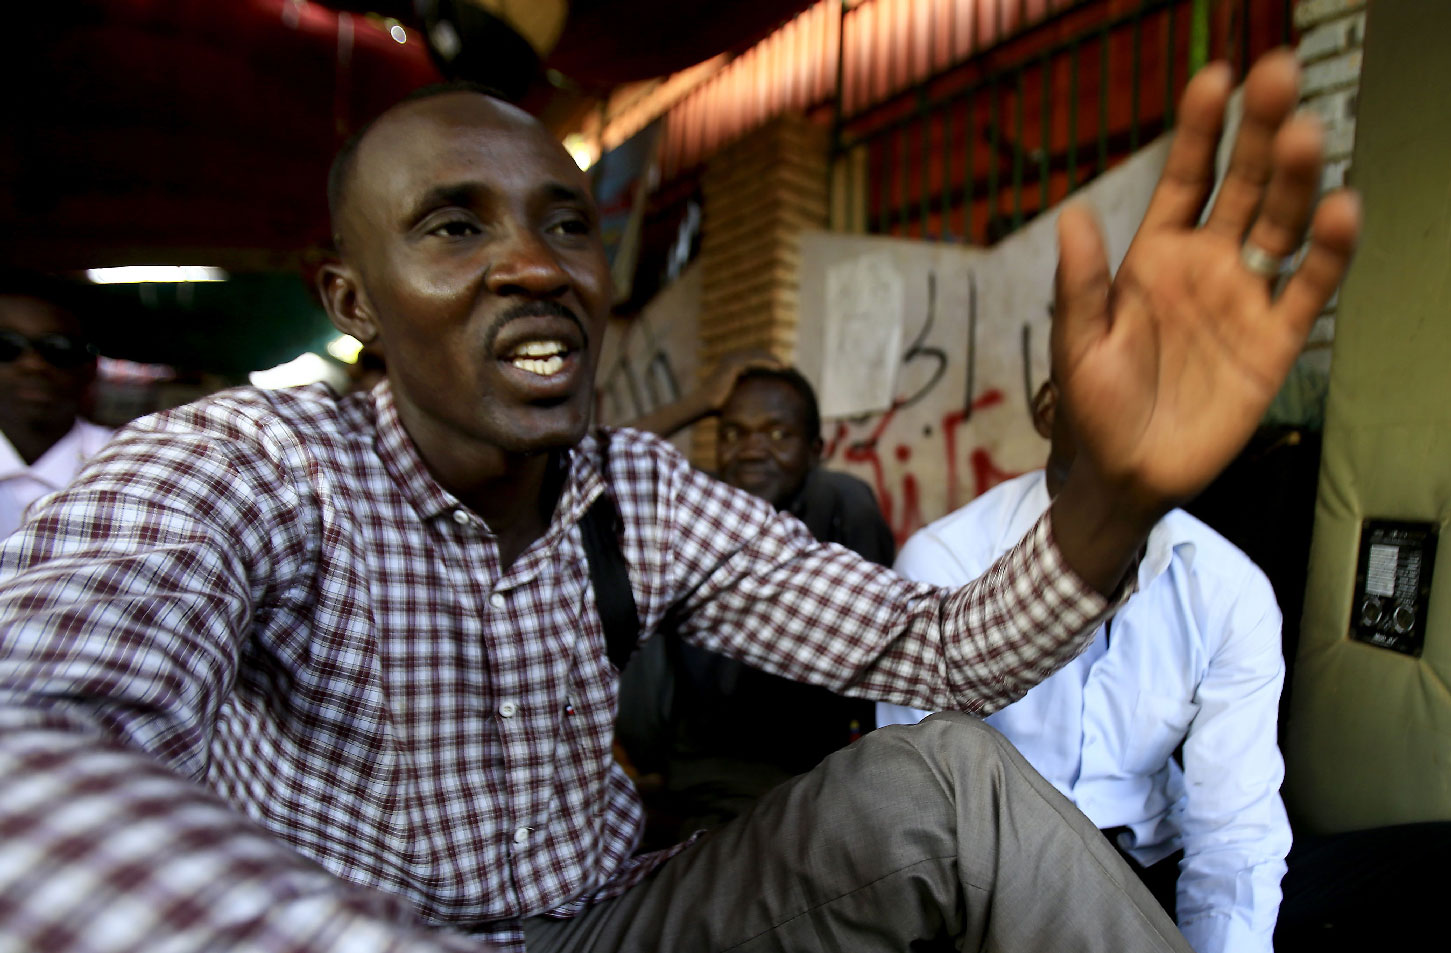 Sudanese man displaced from Darfur, Ahmed Idriss, speaks in a tent for Darfur refugees